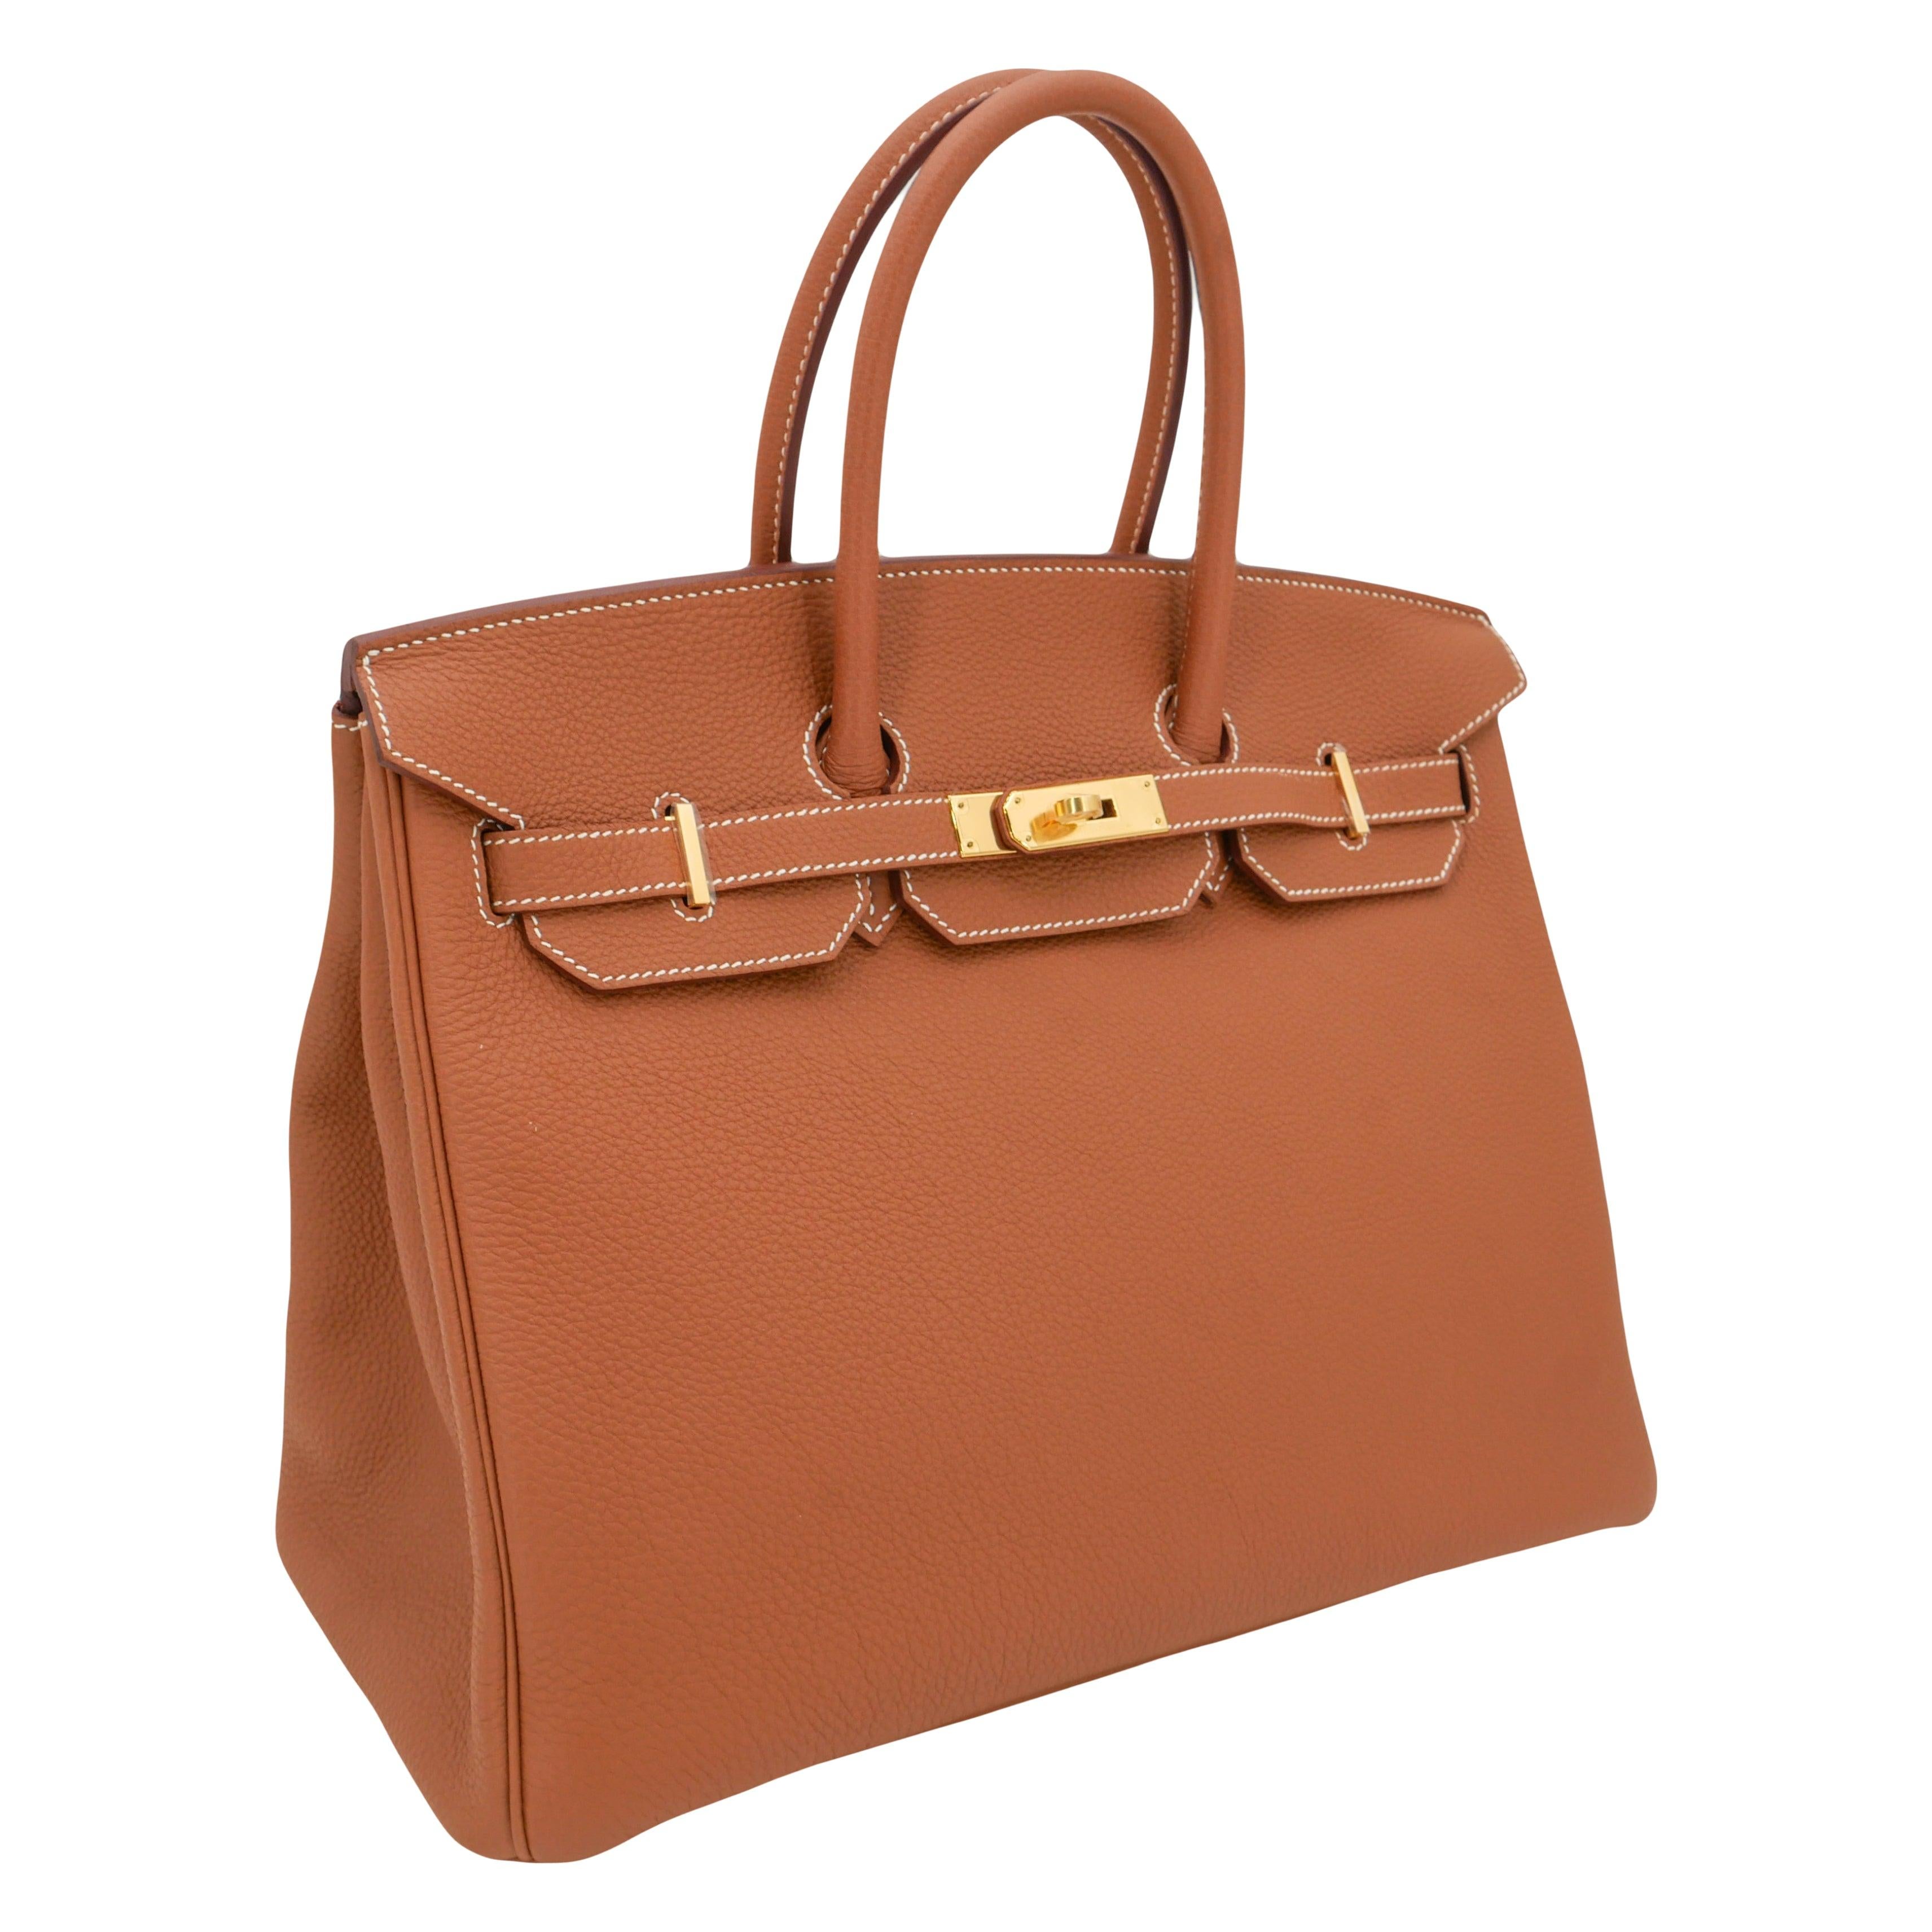 Brand: Hermès
Style: Birkin
Size: 35cm
Color: Gold
Material: Togo Leather
Hardware: Gold (GHW)
Dimensions: 13.75